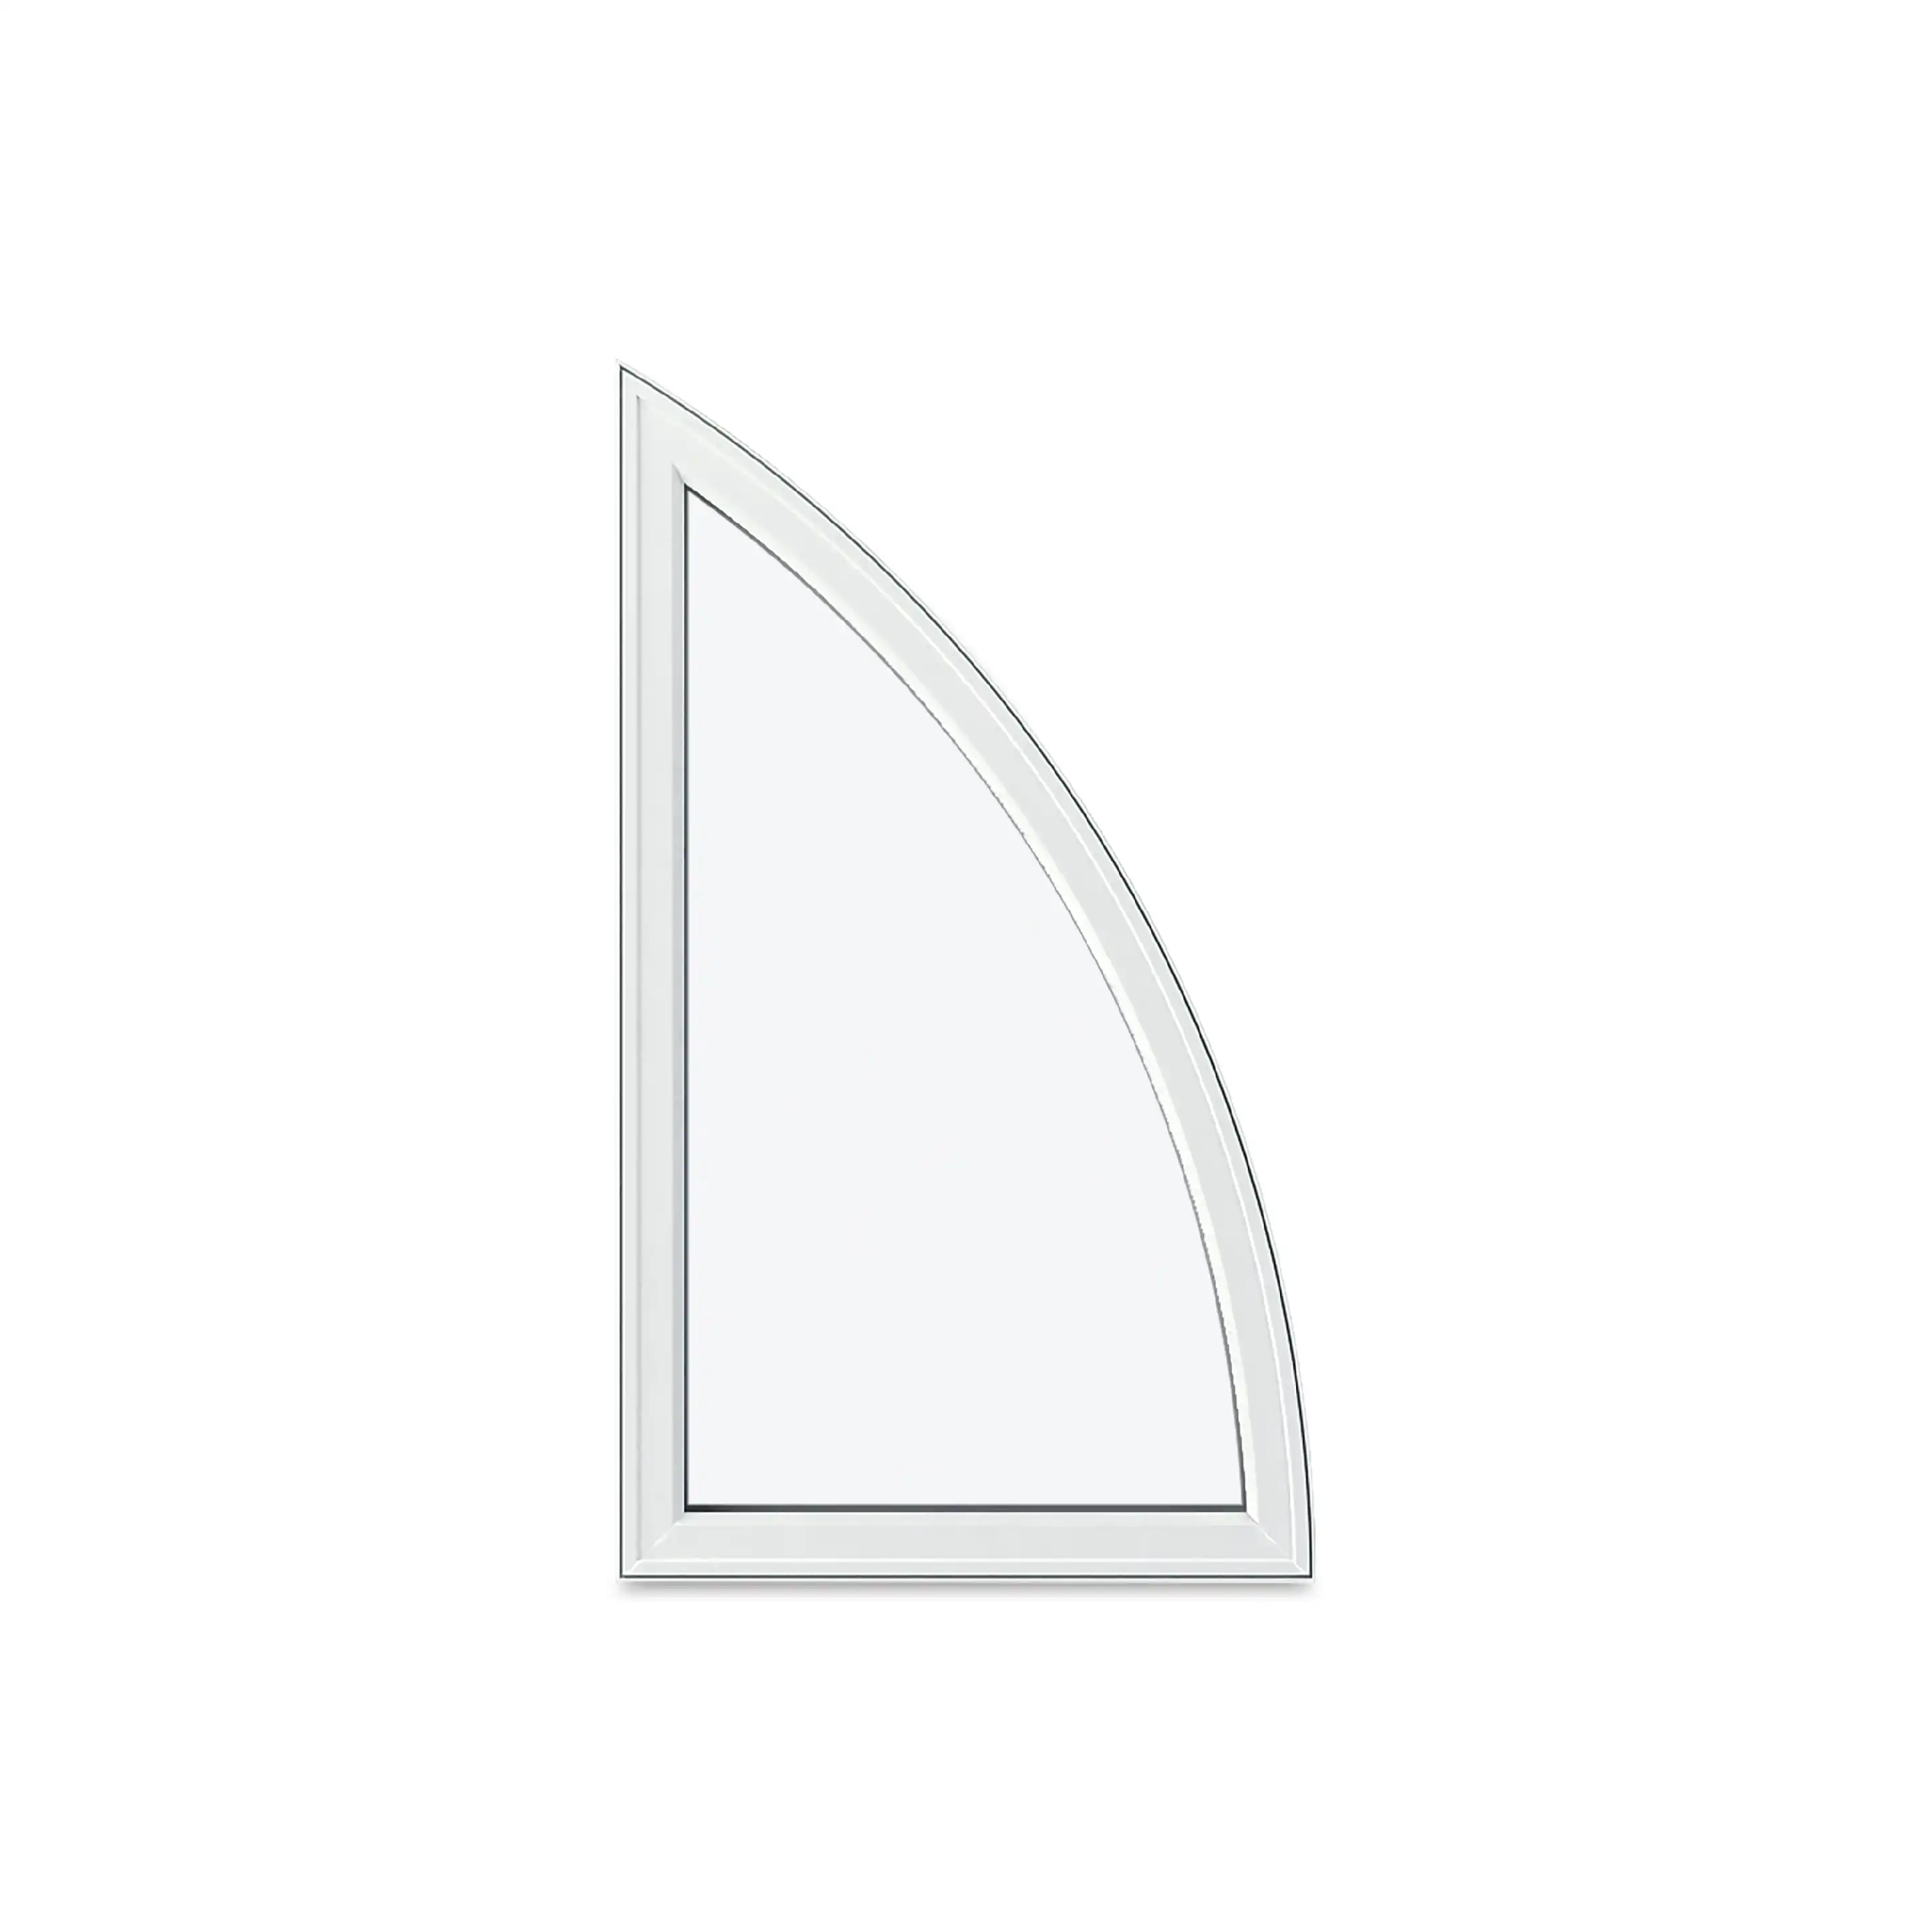 Image of a white Marvin Replacement Arch window in a Quarter Eyebrow style.